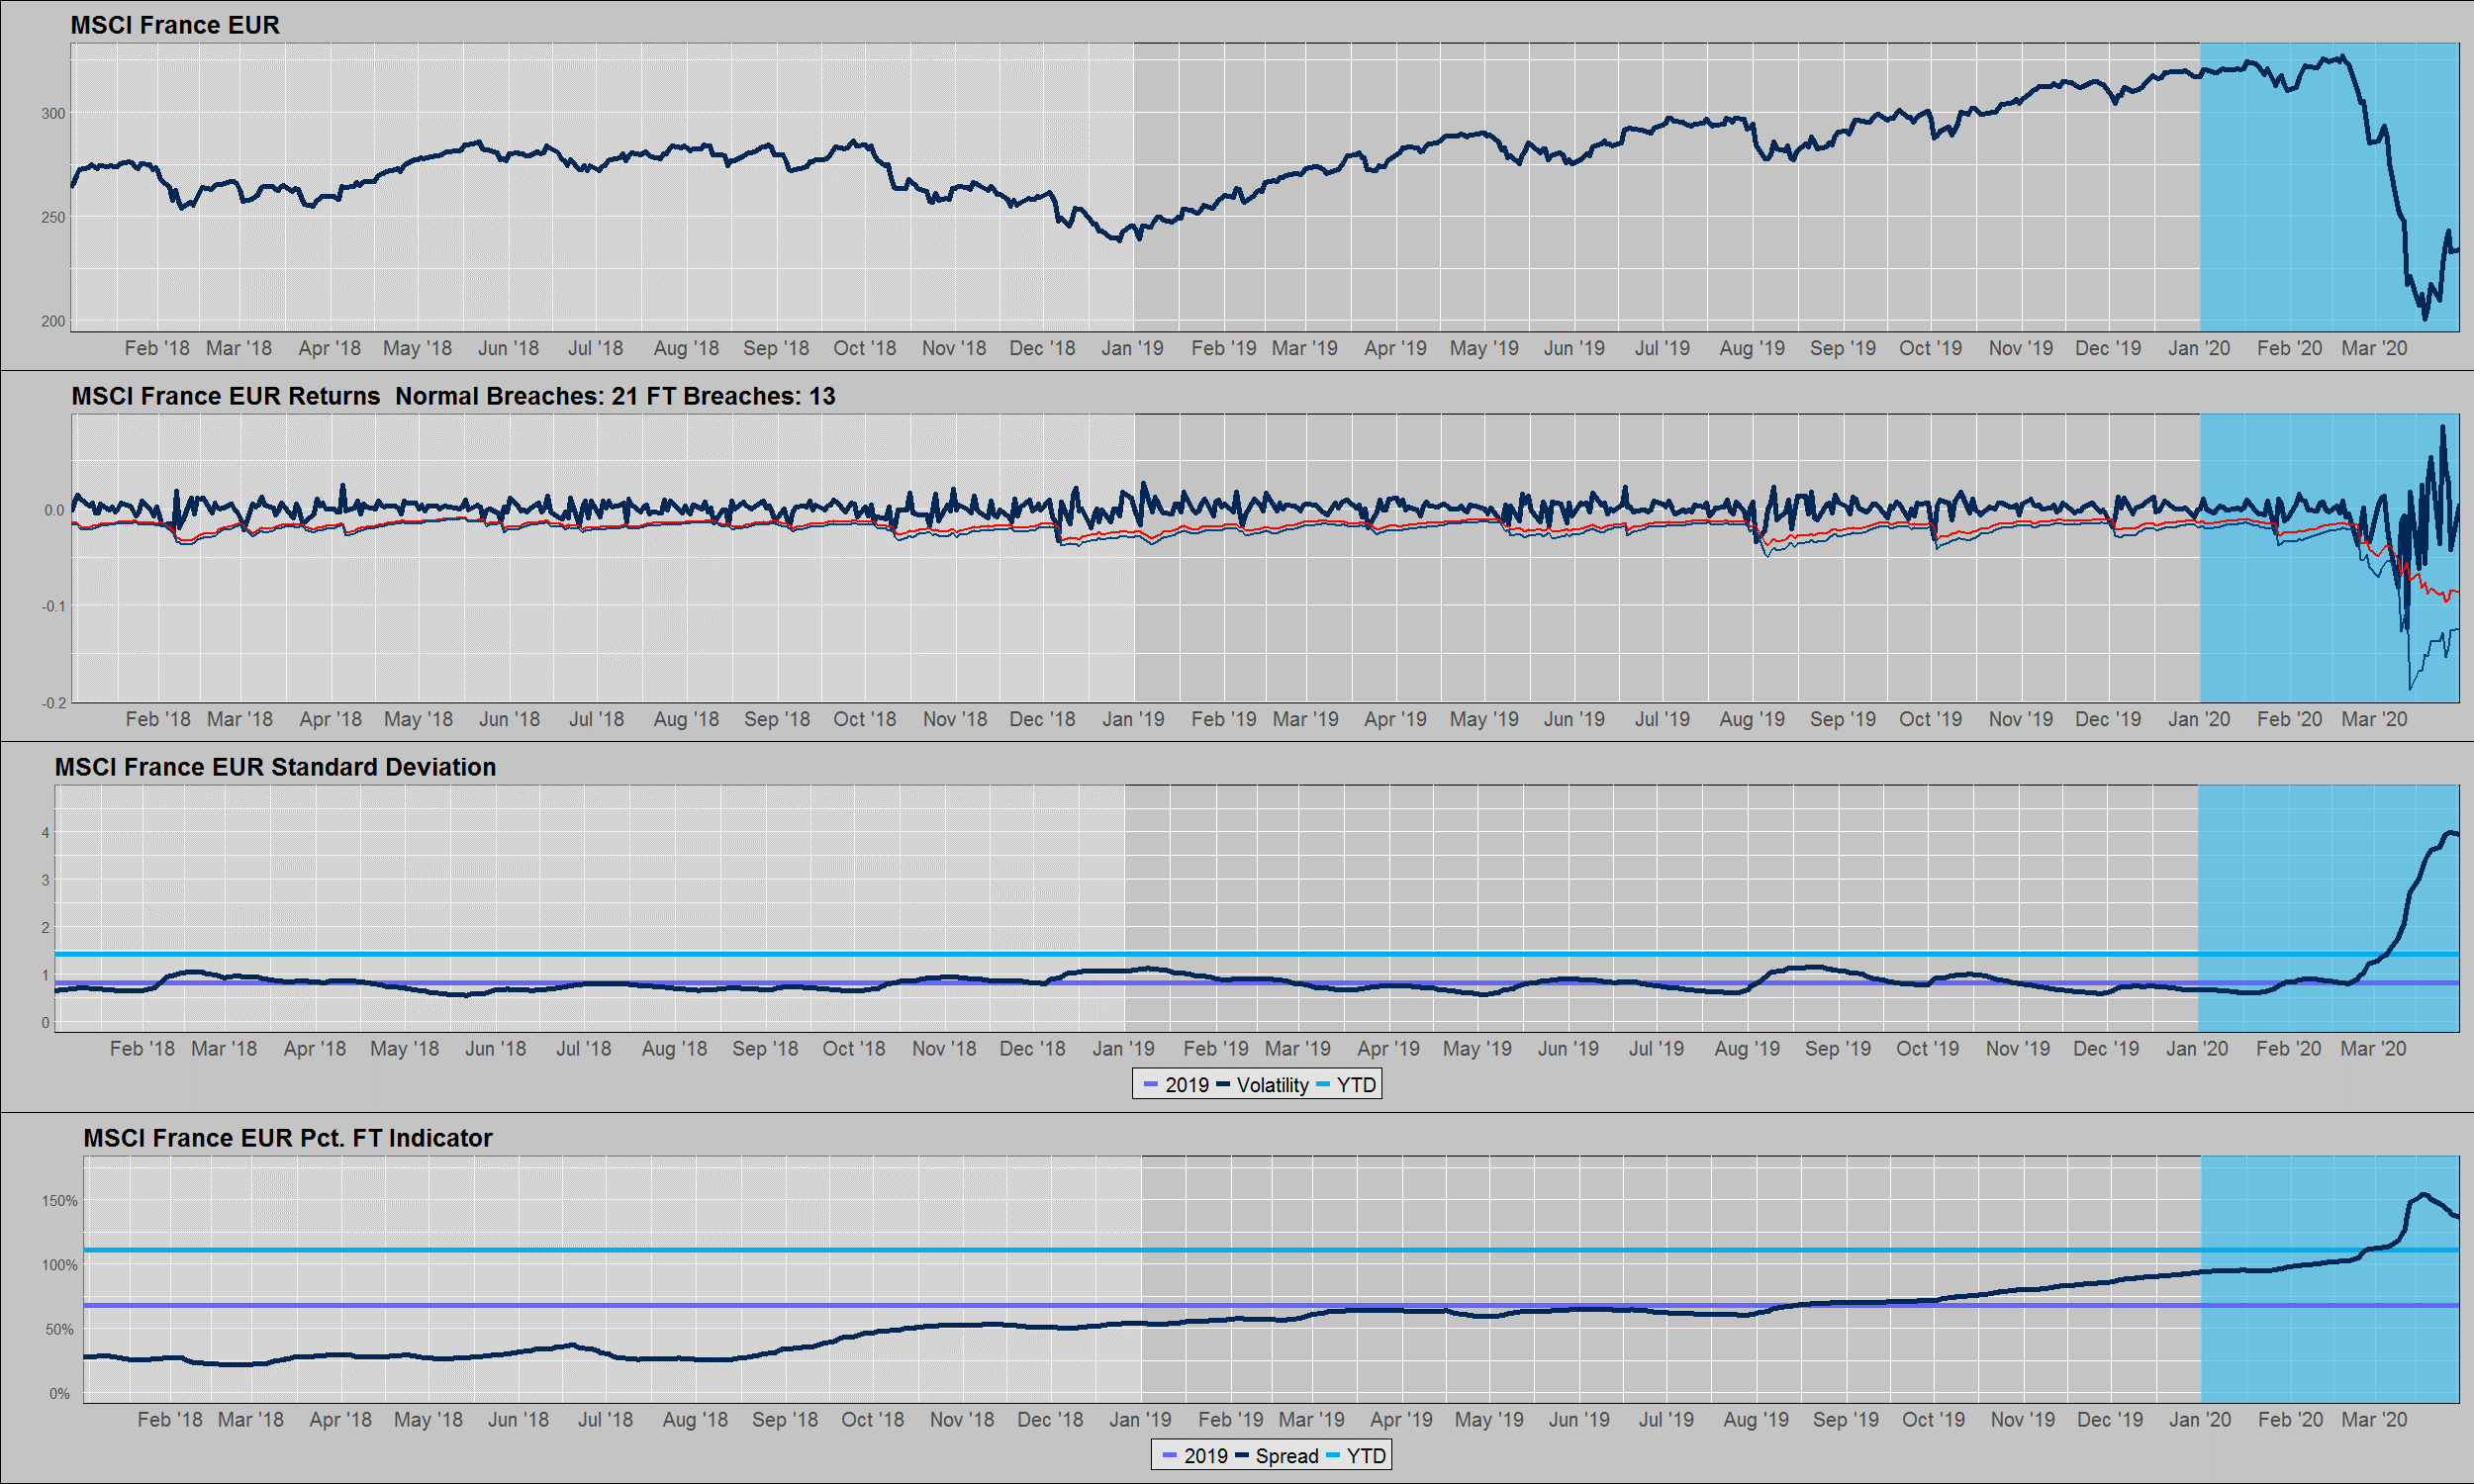 Figure 3: MSCI France Performance, Volatility, and Fat-Tail Indicator